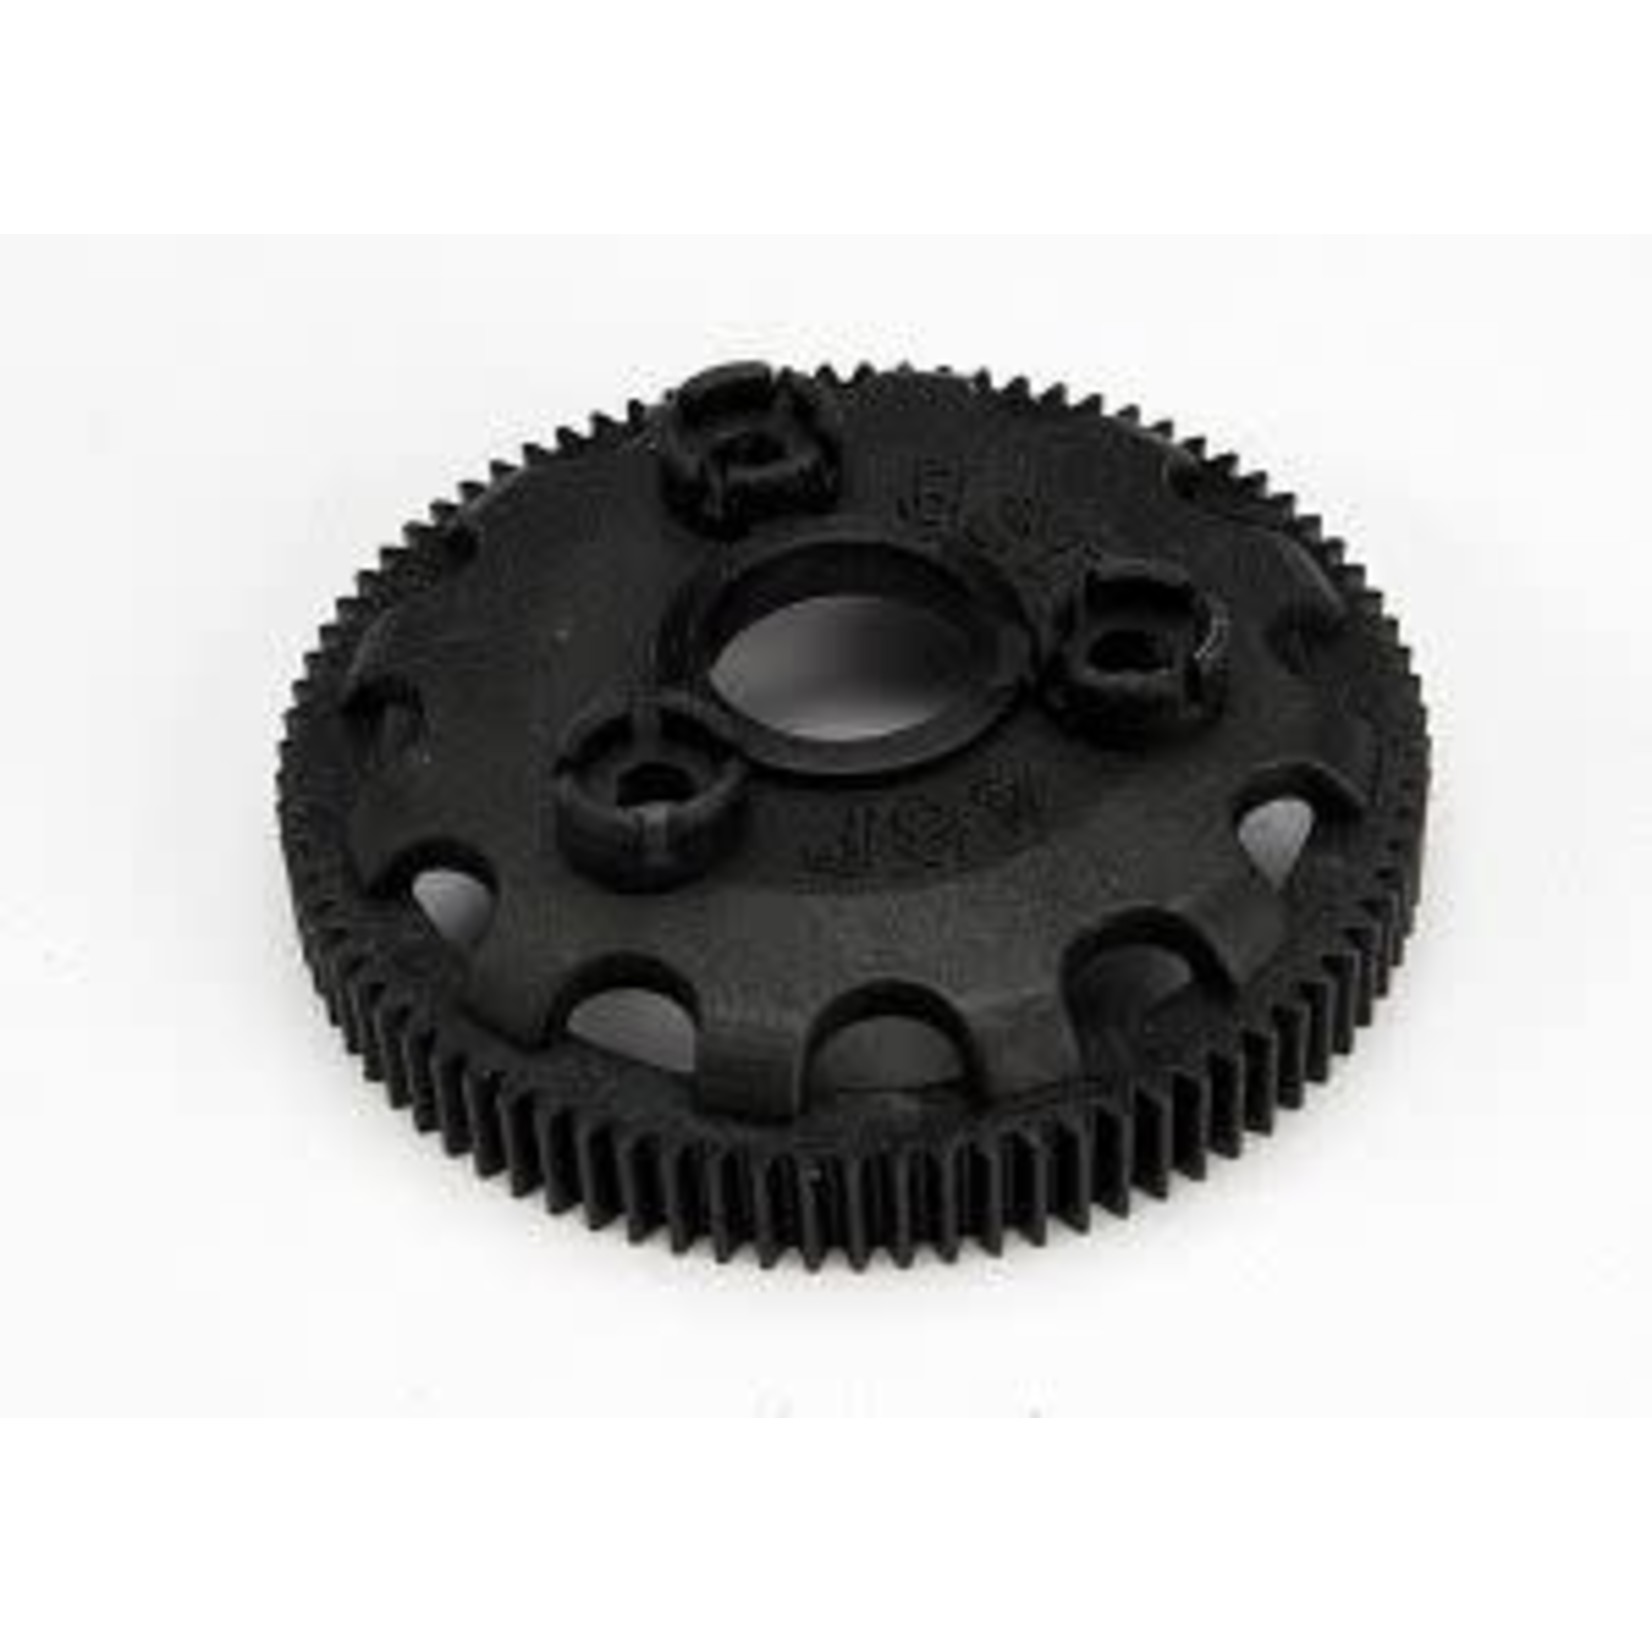 Traxxas 4683   Spur gear, 83-tooth (48-pitch) (for models with Torque-Control slipper clutch)